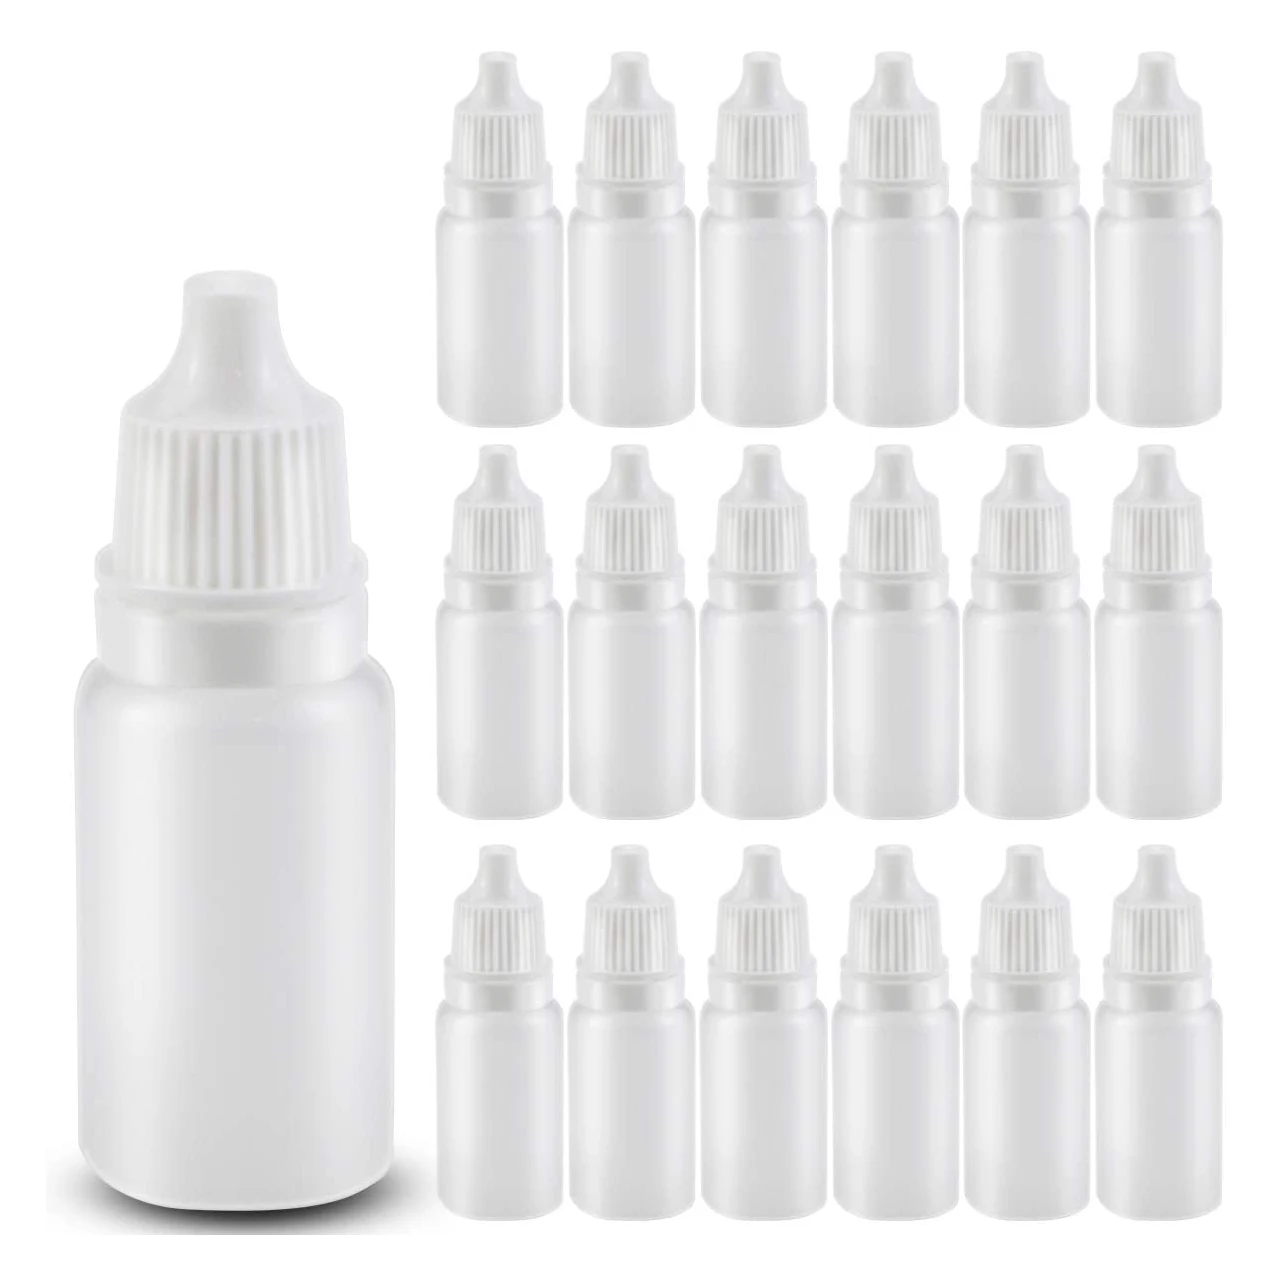 

50pcs Pack 10ml Plastic Dropper Bottle, Small Mouth Drop Bottles Empty Squeezable Eye Liquid Oil Containers, Free 10 Funnels